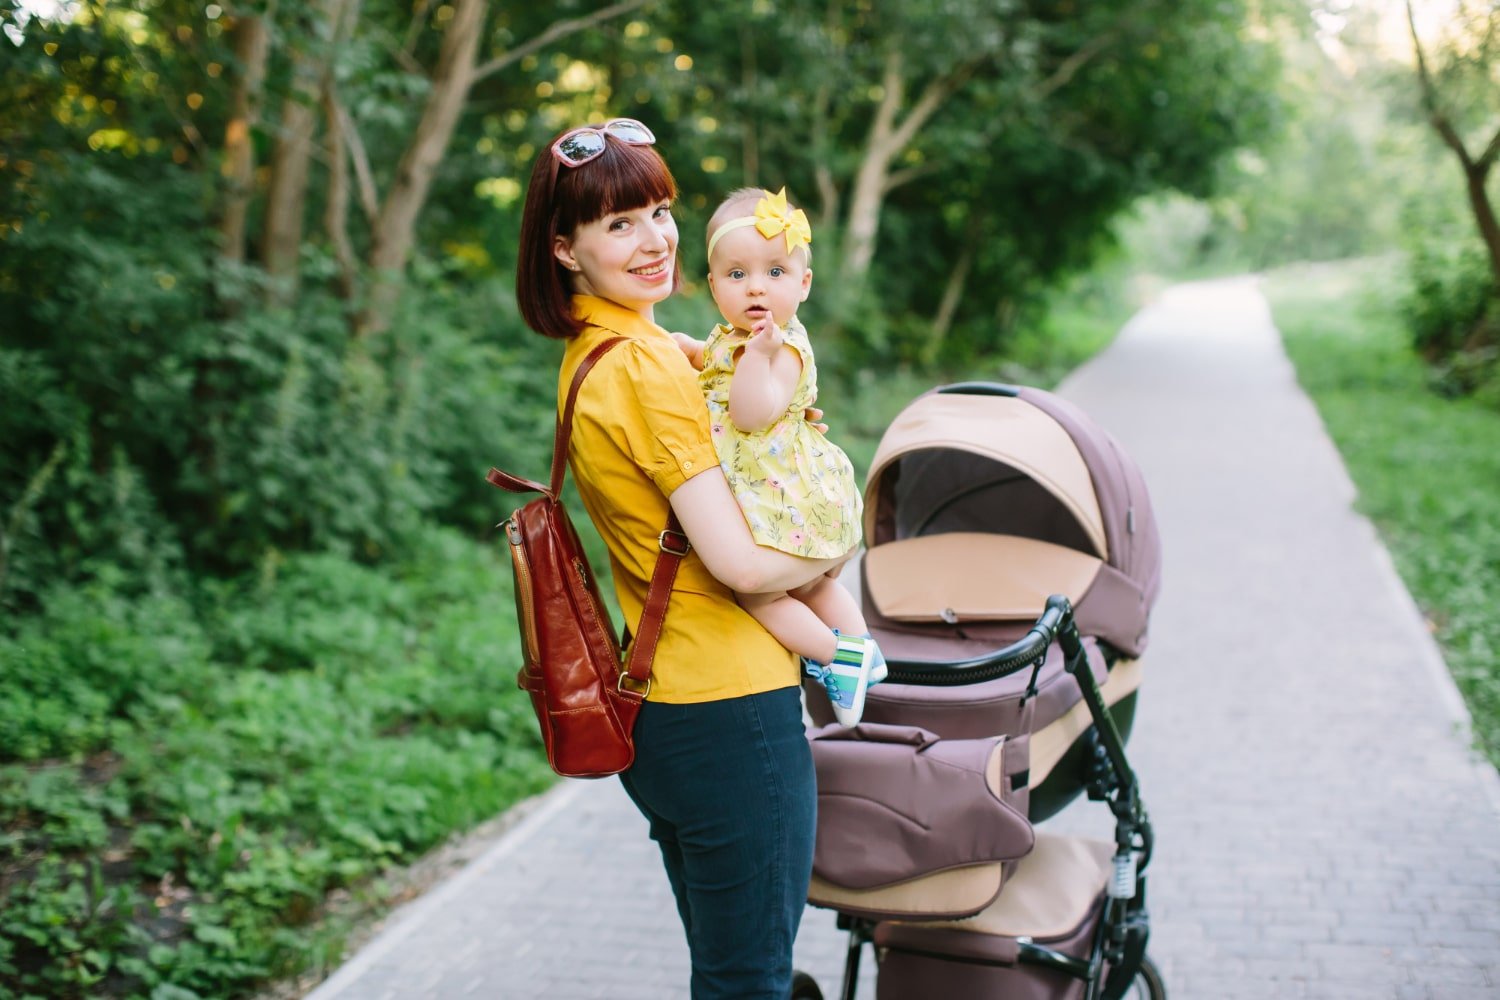 Travel Light And Safe With Guava Family’s Portable Baby Gear